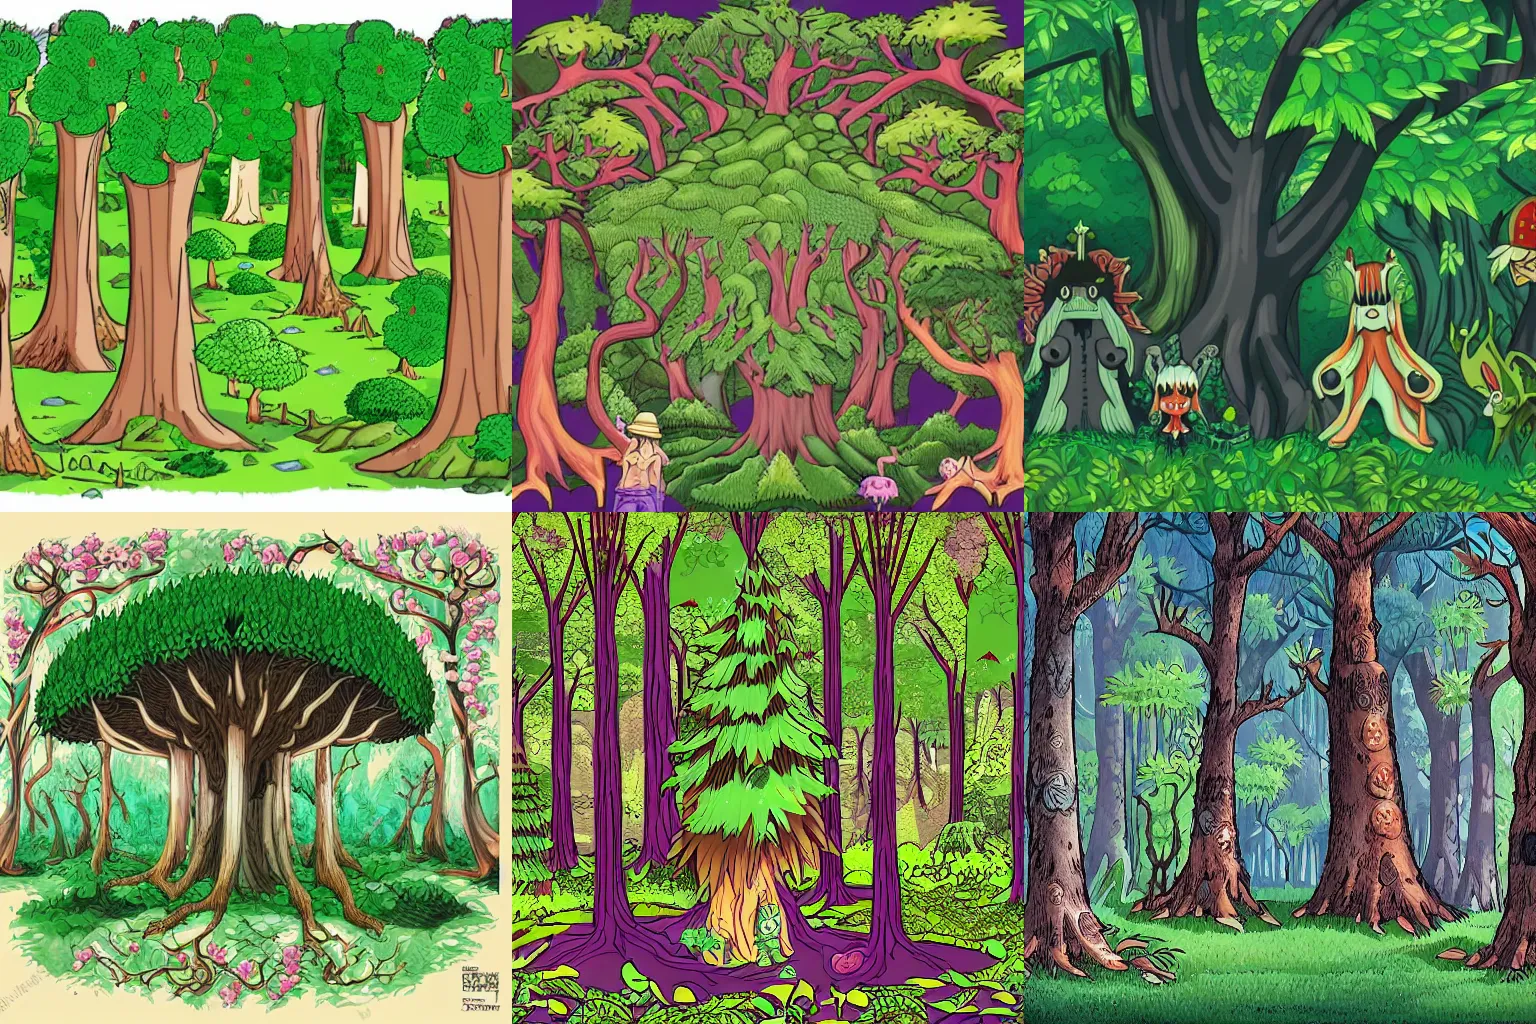 Prompt: a mythical forest with unique trees in the style of One Piece